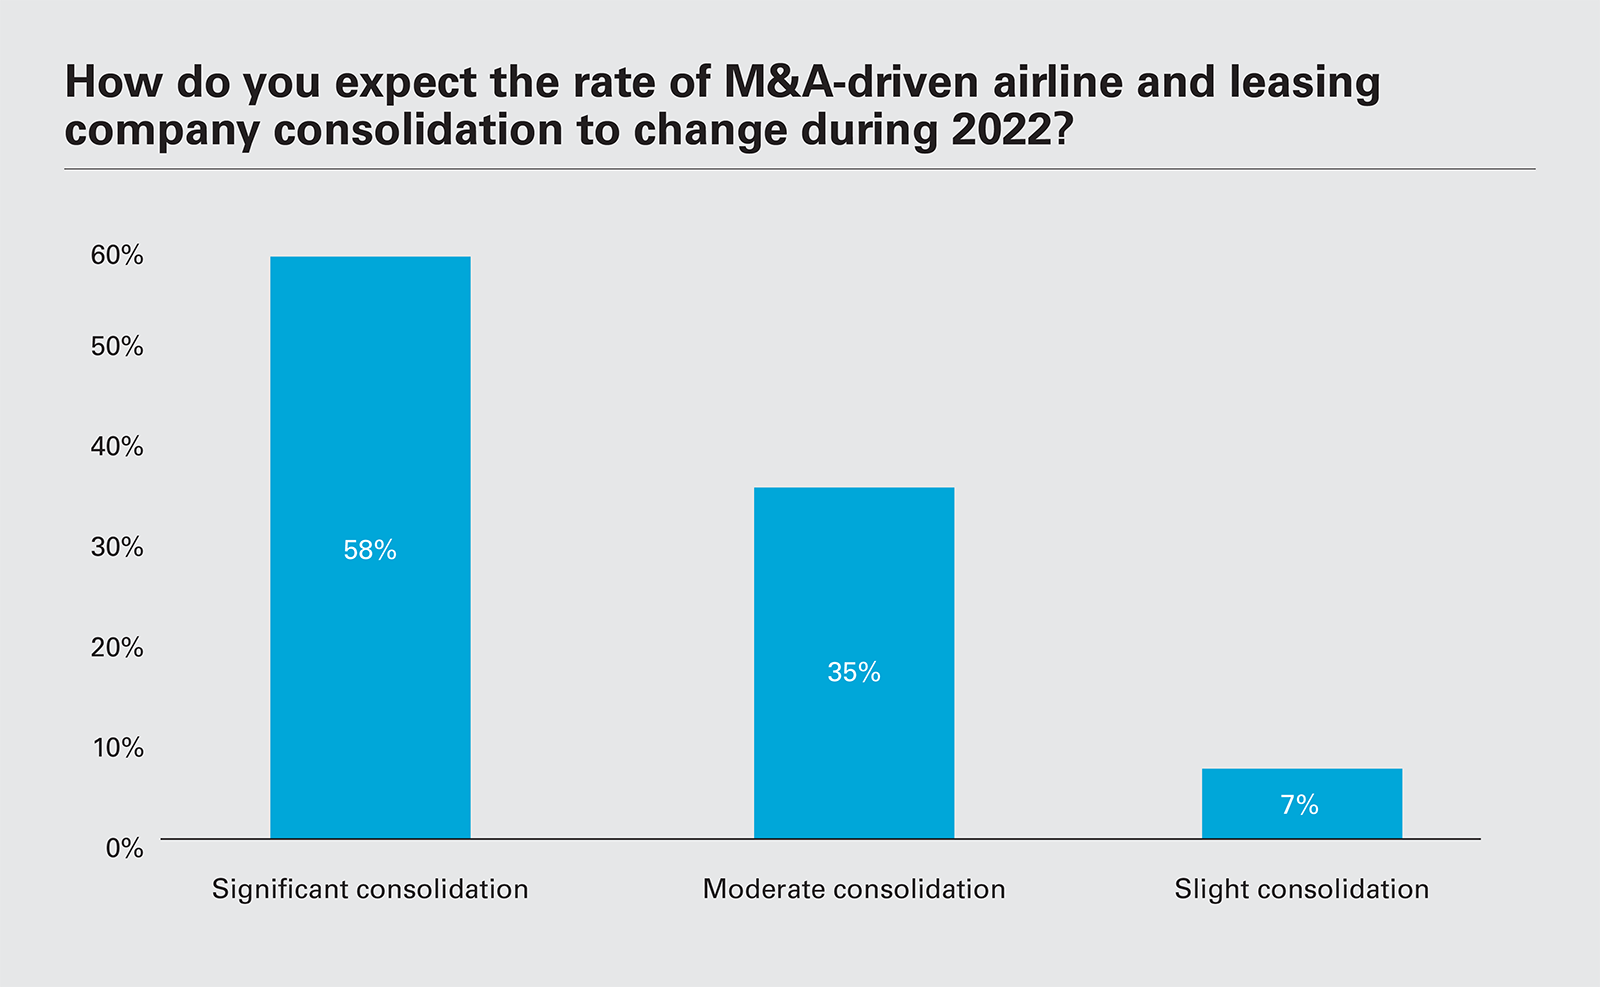 How do you expect the rate of M&A-driven airline and leasing company consolidation to change during 2022?